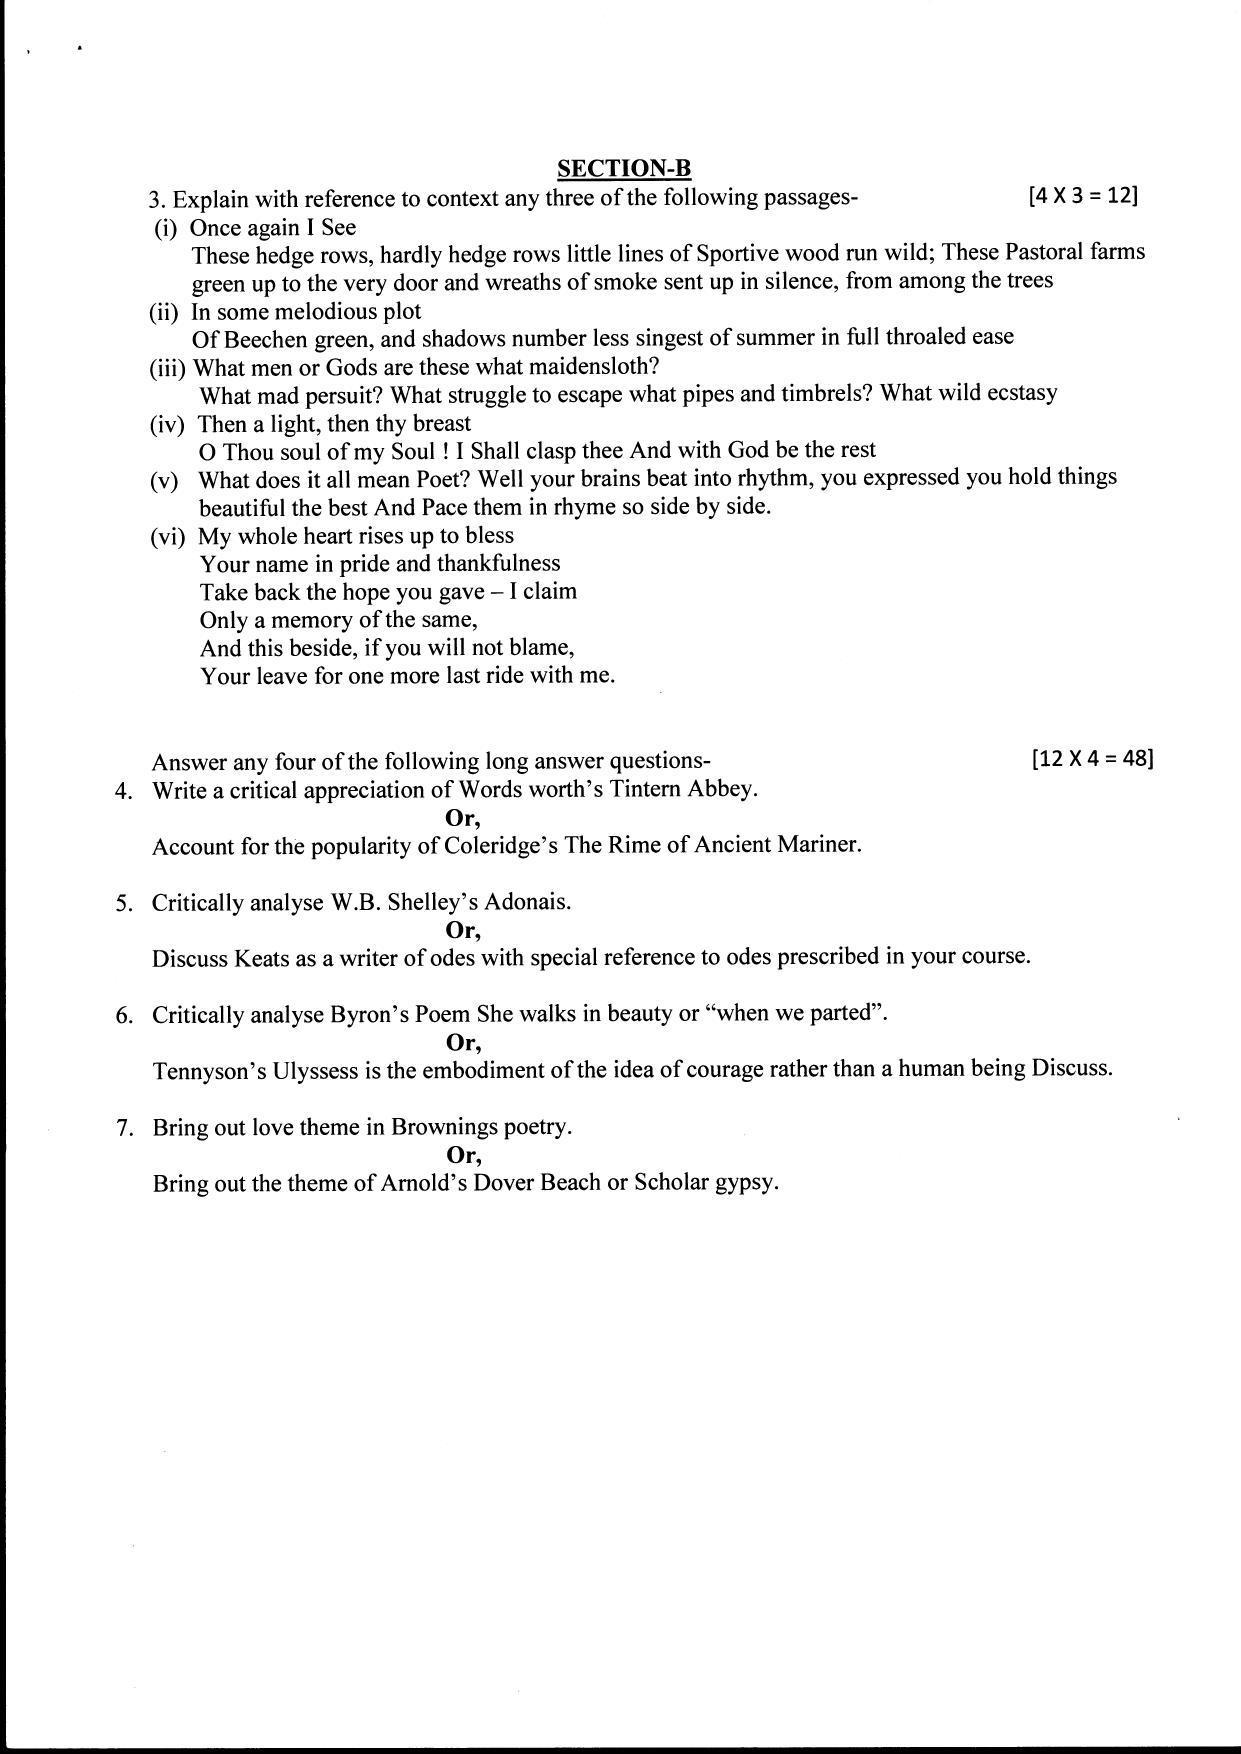 Bilaspur University Question Paper June 2022:M.A. English (Second Semester) Poetry Paper 1 - Page 2